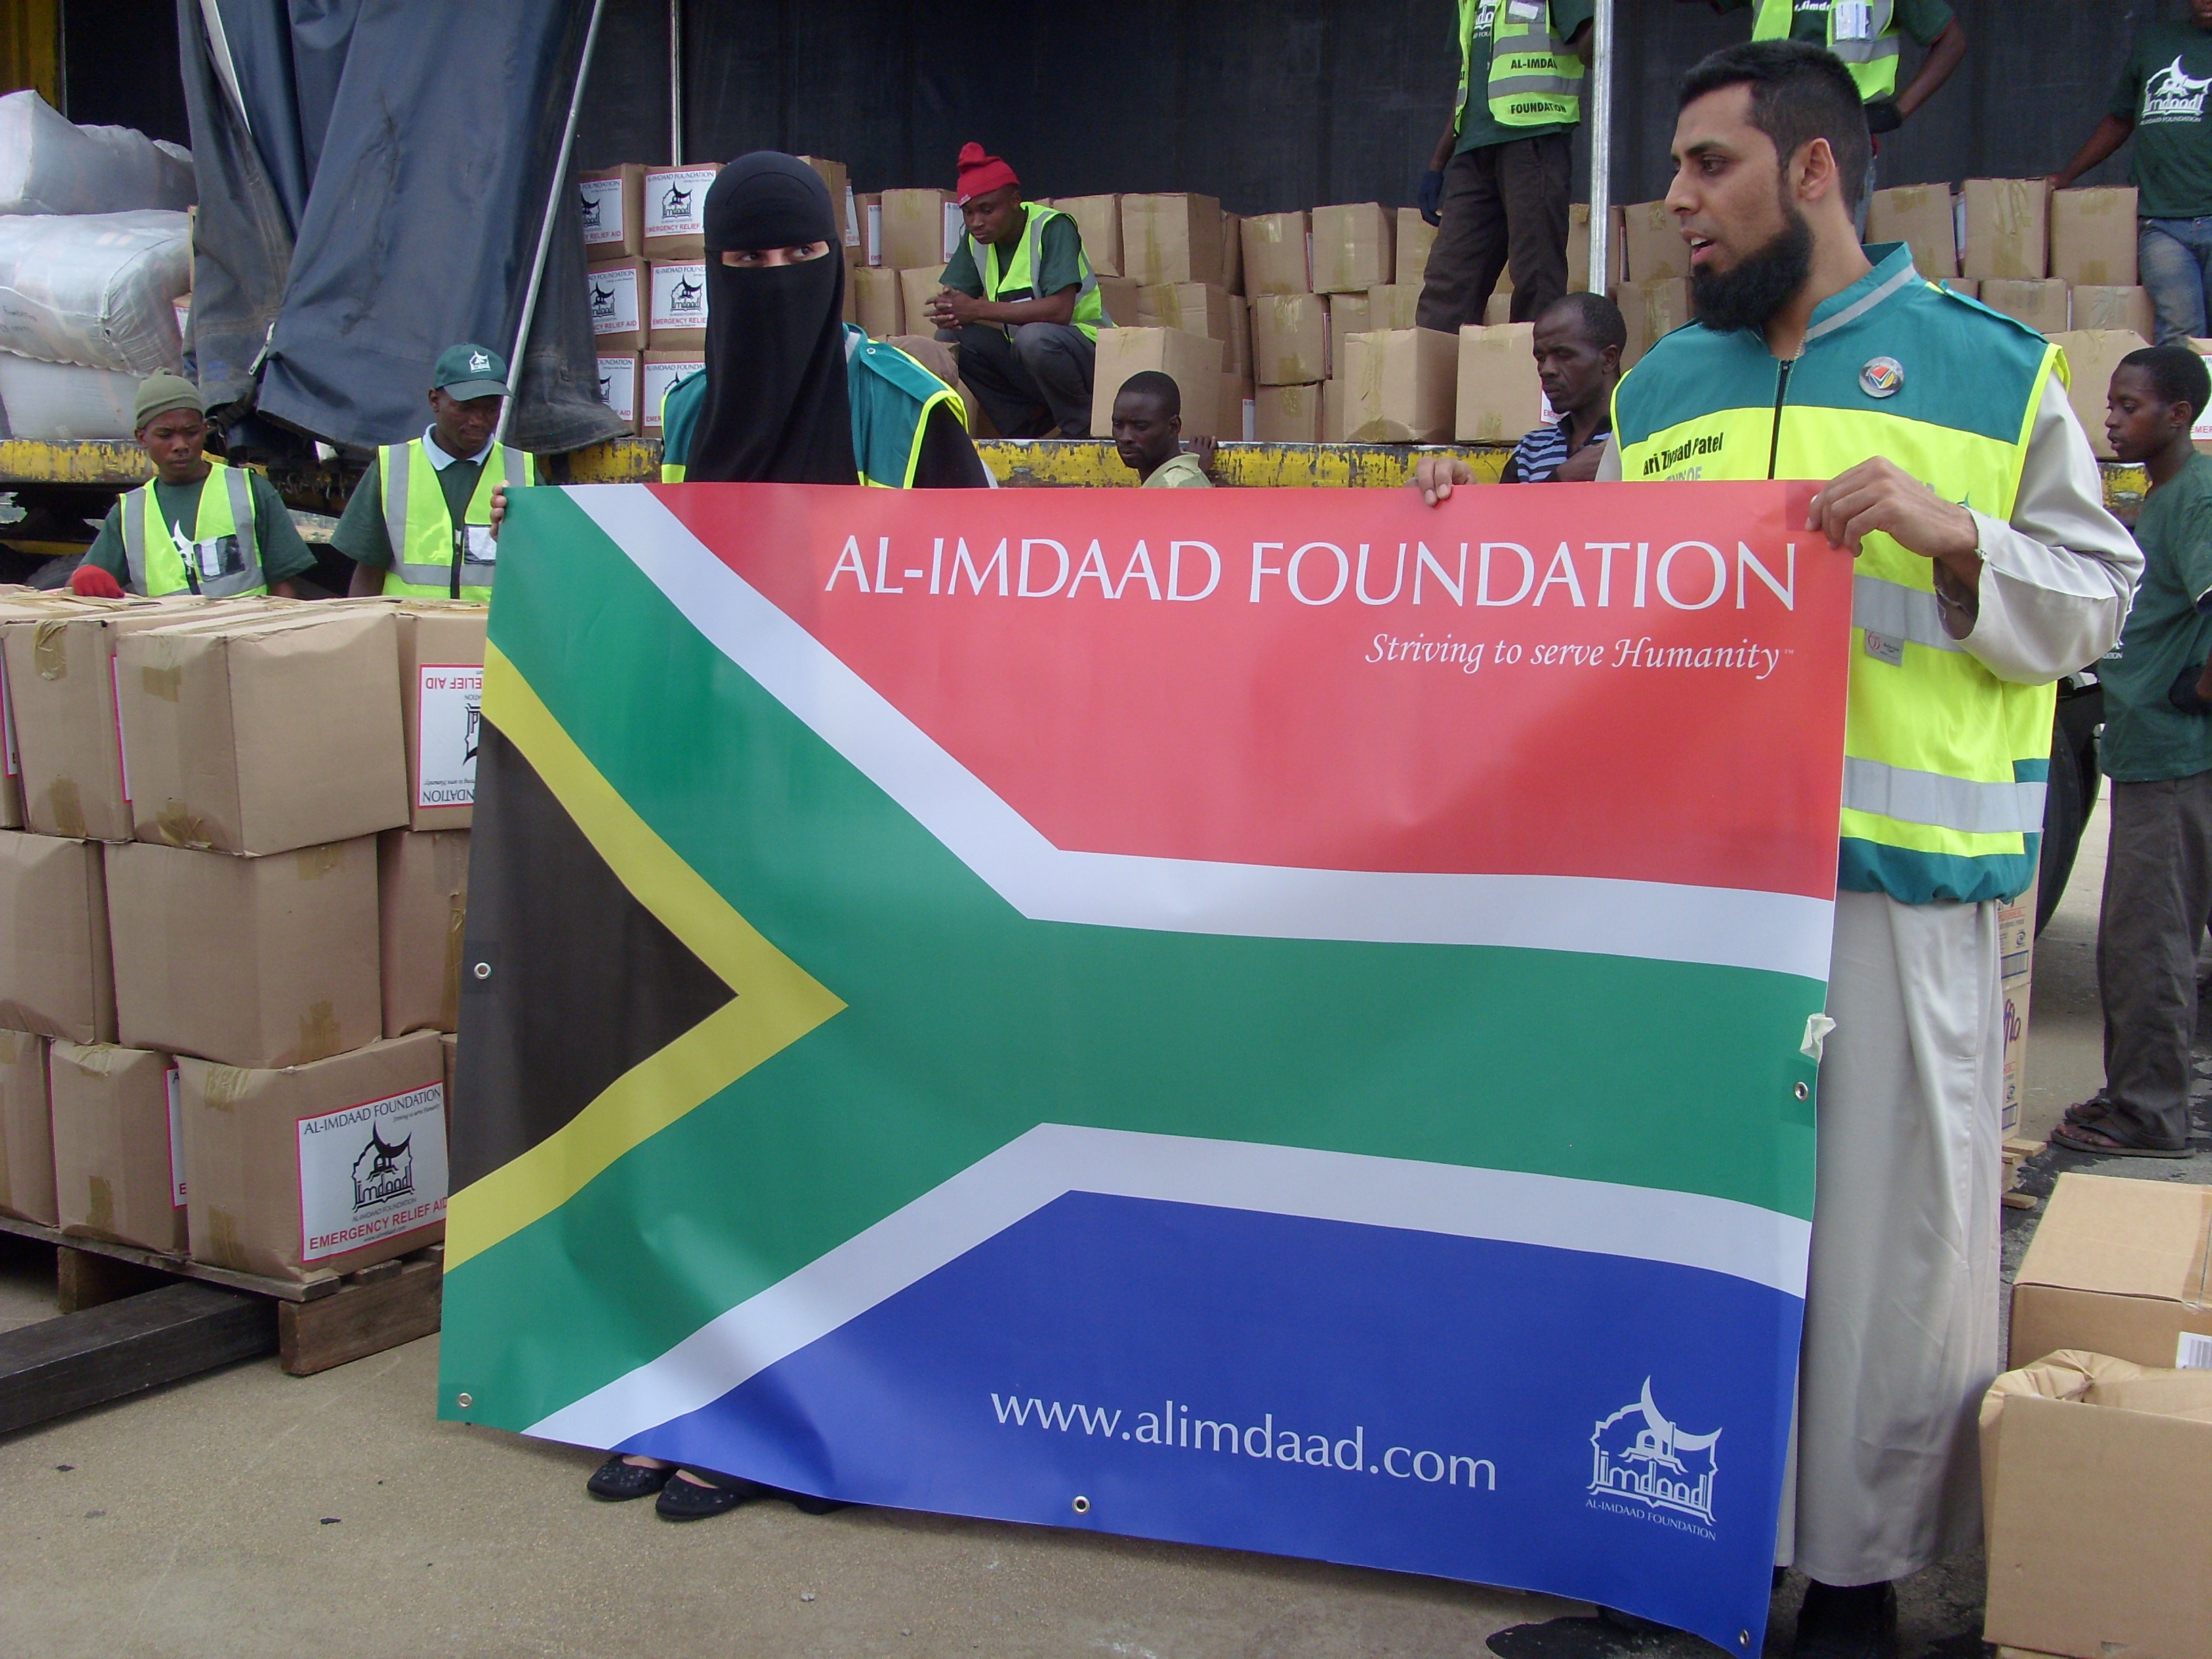 This was a joint project by the Department of International relations and Co-Operation and the Al Imdaad Foundation